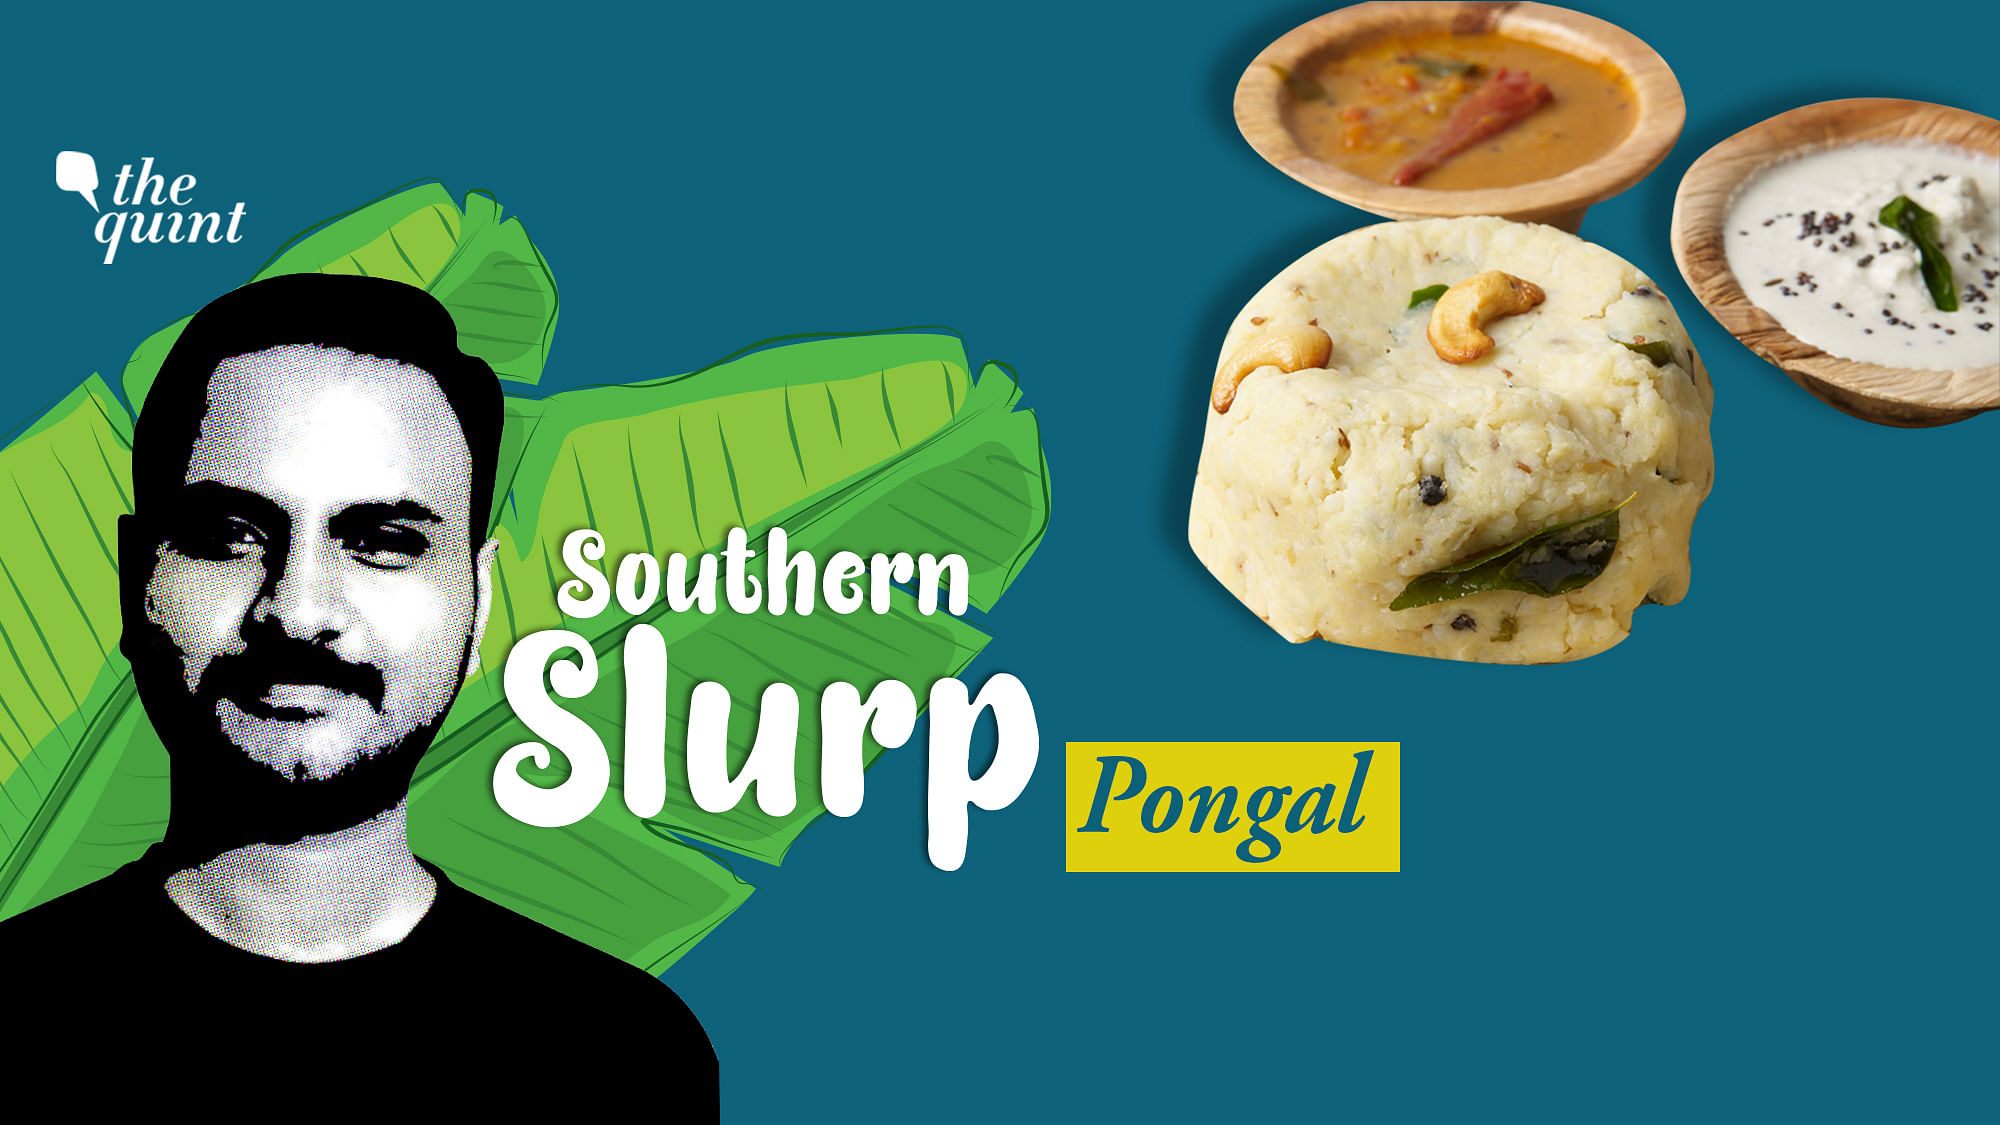 Pongal-O-Pongal! The history is as tasty as the recipe!